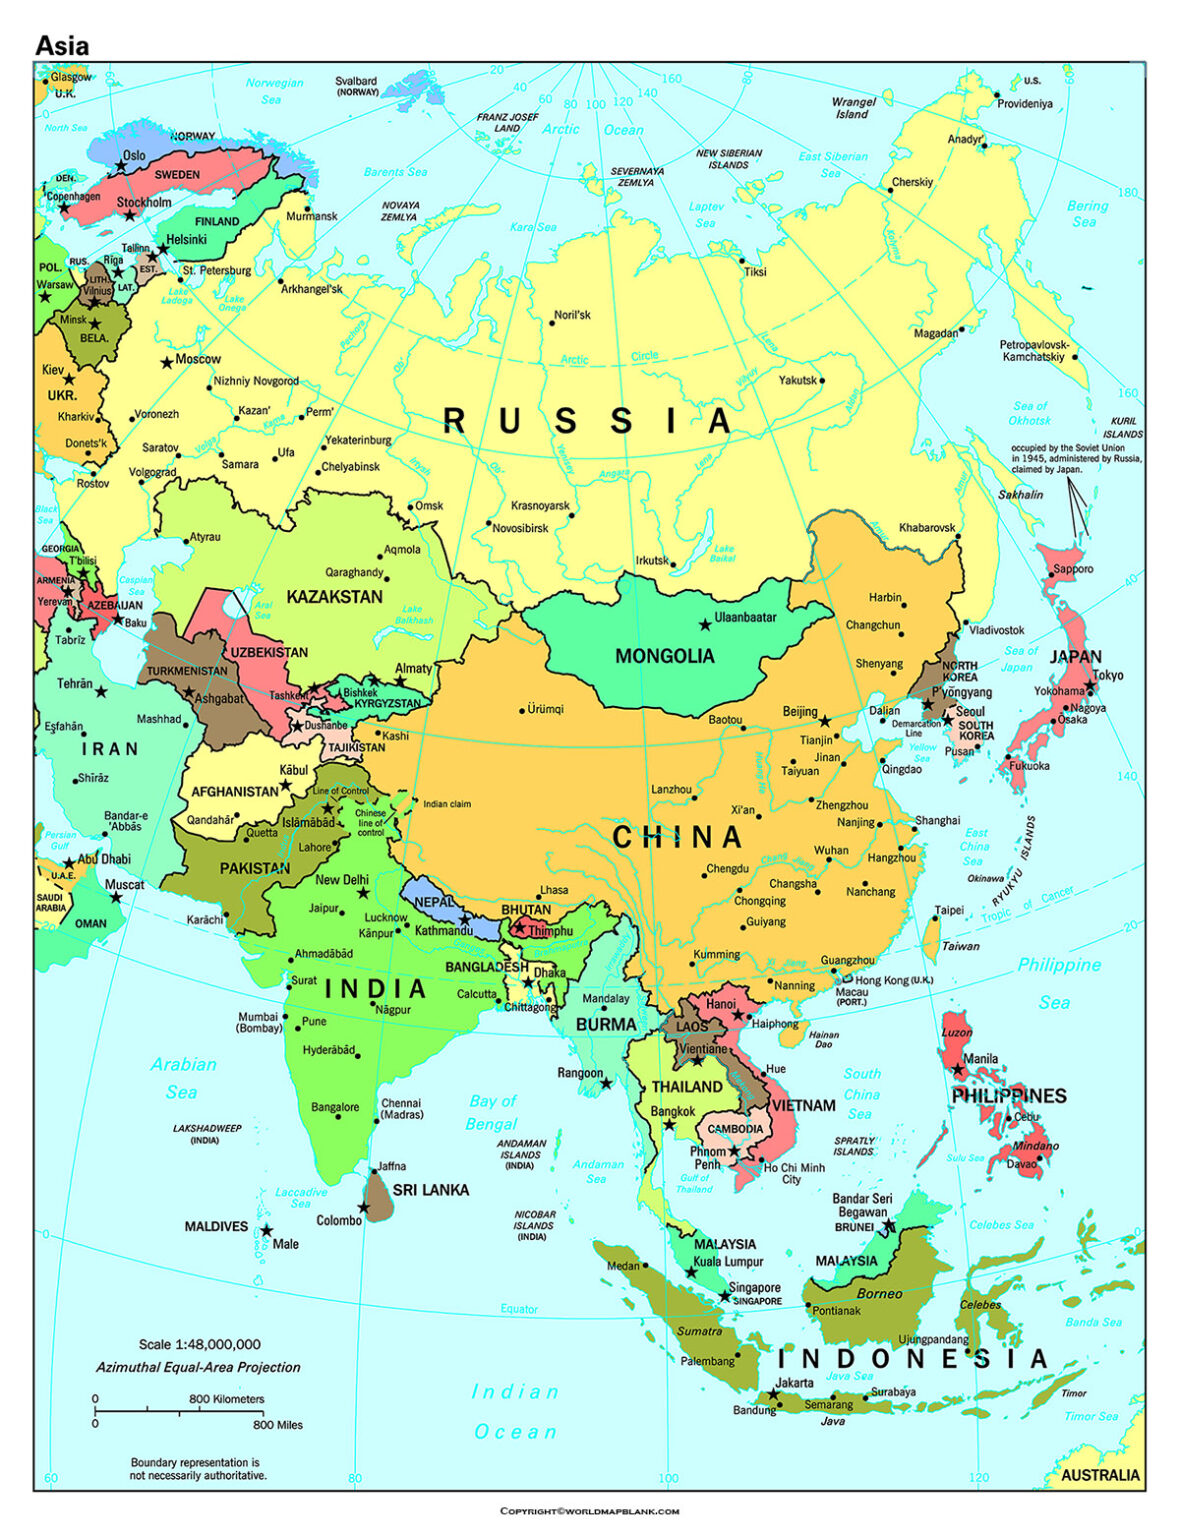 asia-labelled-map